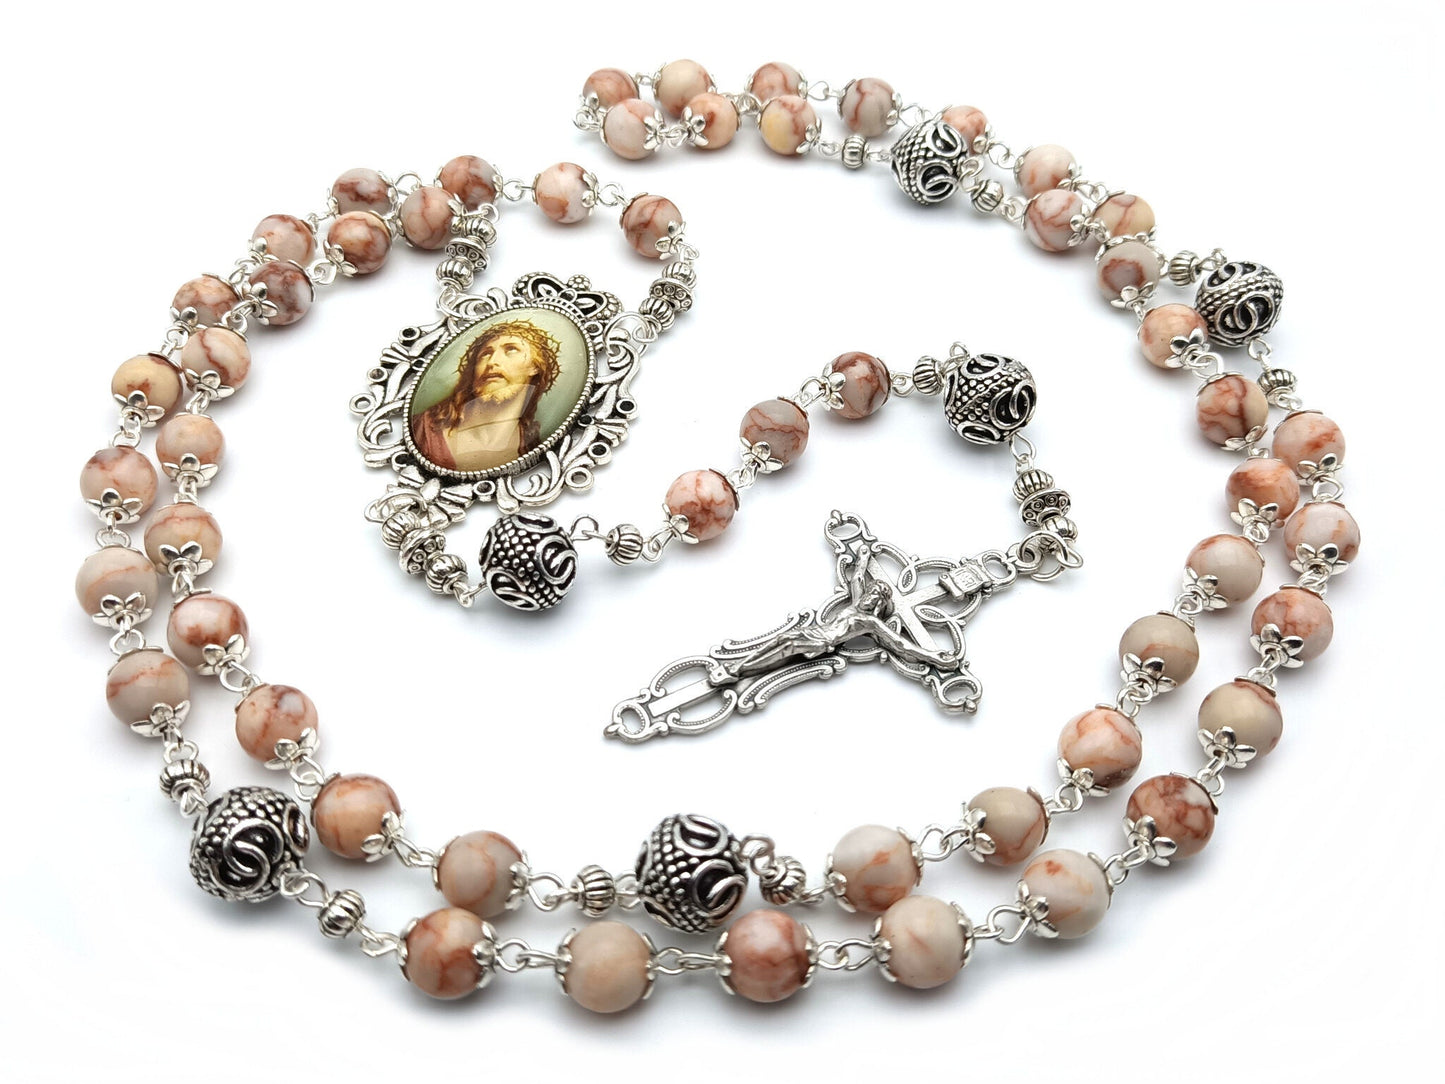 The Crown of Thorns unique rosary beads with marbled gemstone beads, silver pater beads, crucifix and picture centre medal.